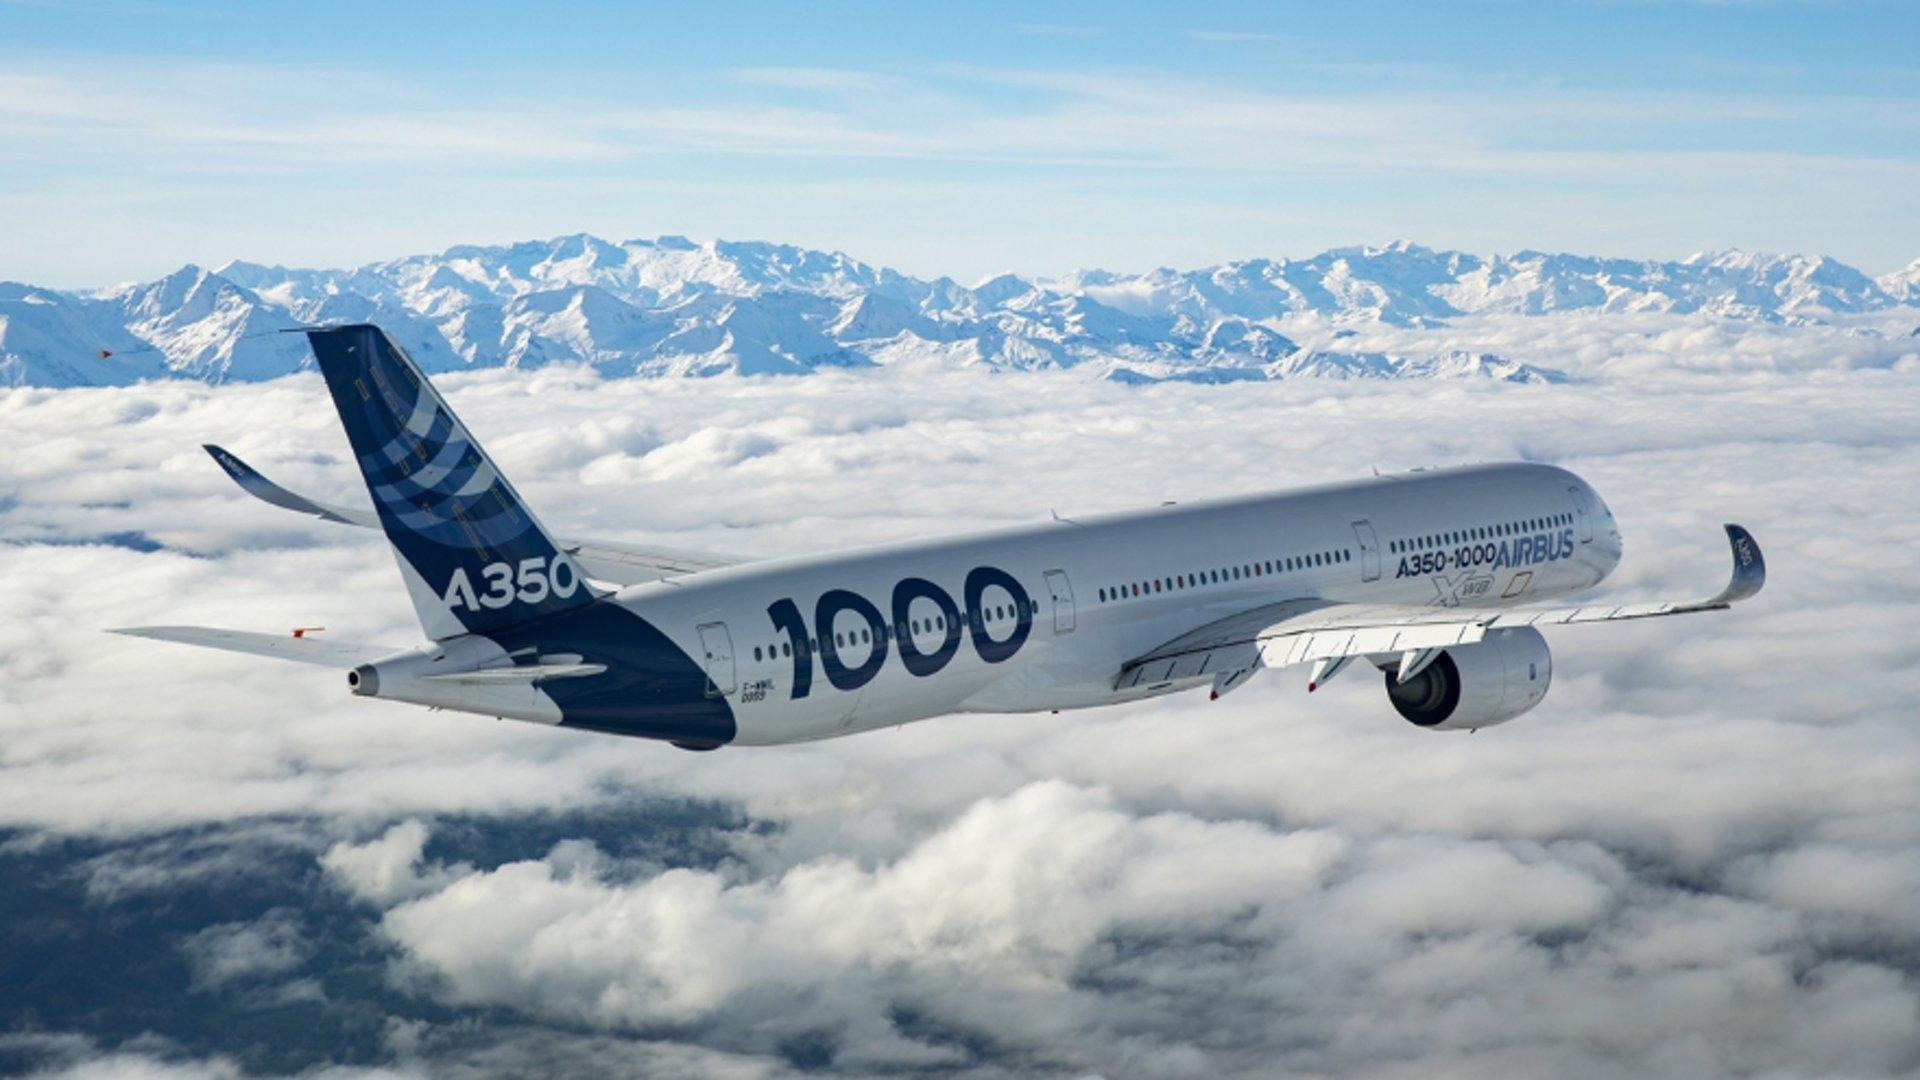 Airbus sold a total of 431 aircraft during the international air